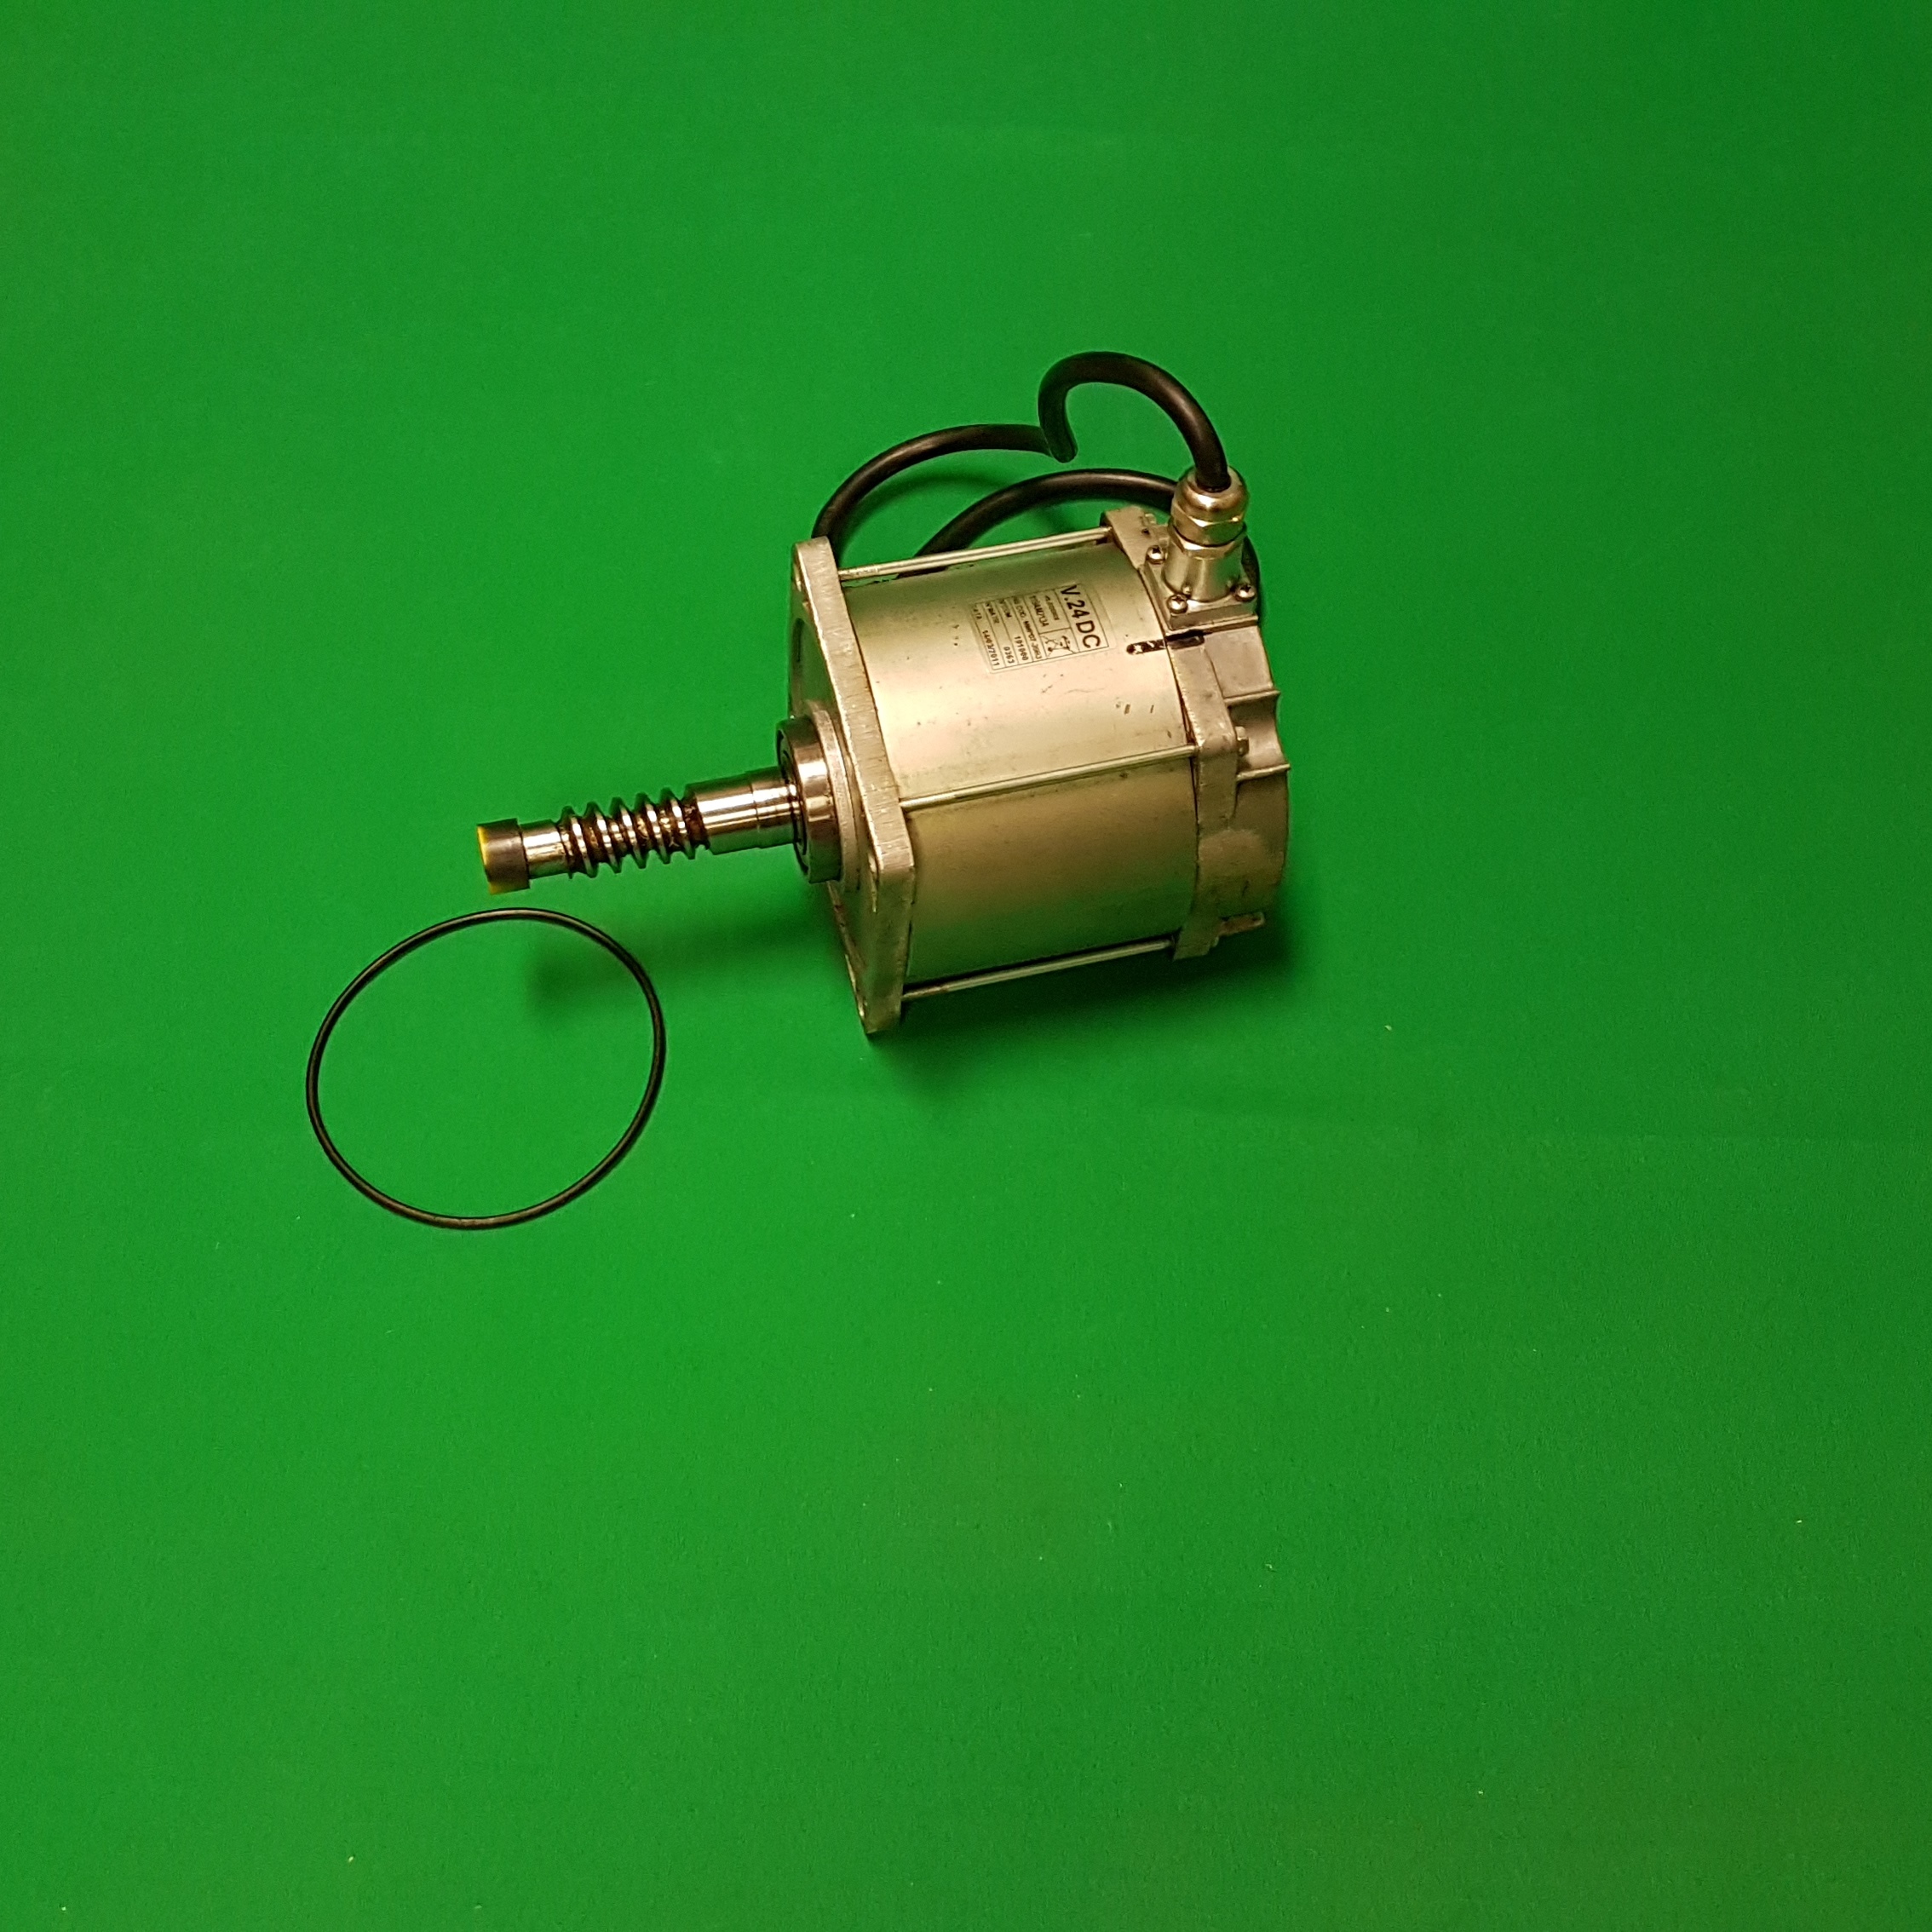 CAME Replacement Frog A24 Motor Assembly